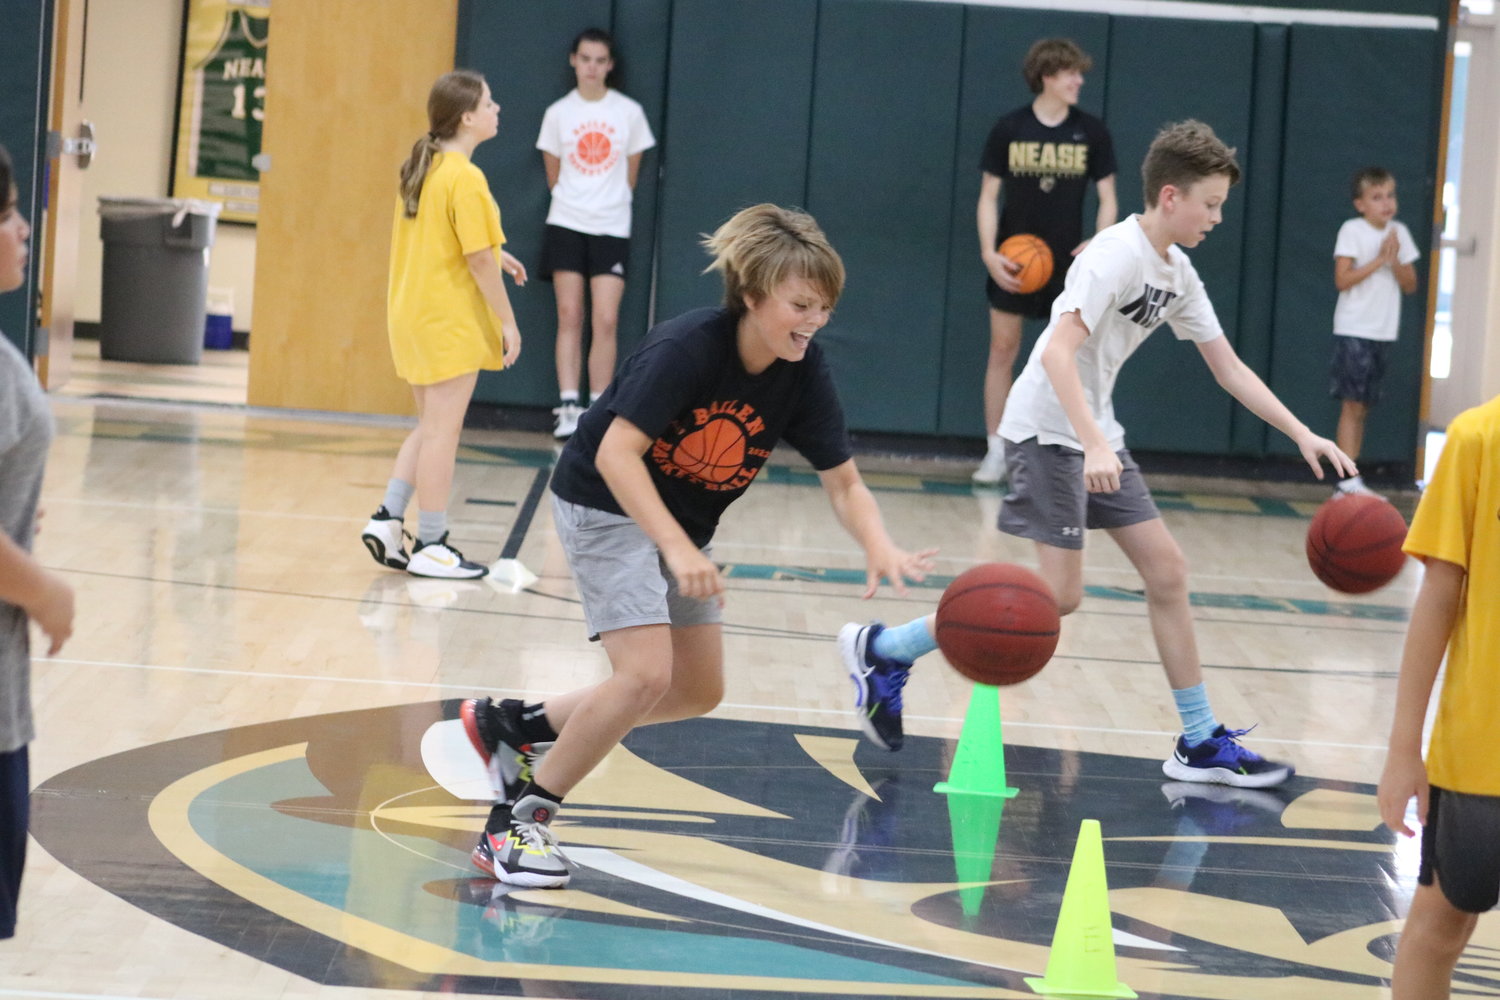 Putting dribbling skills to the test.